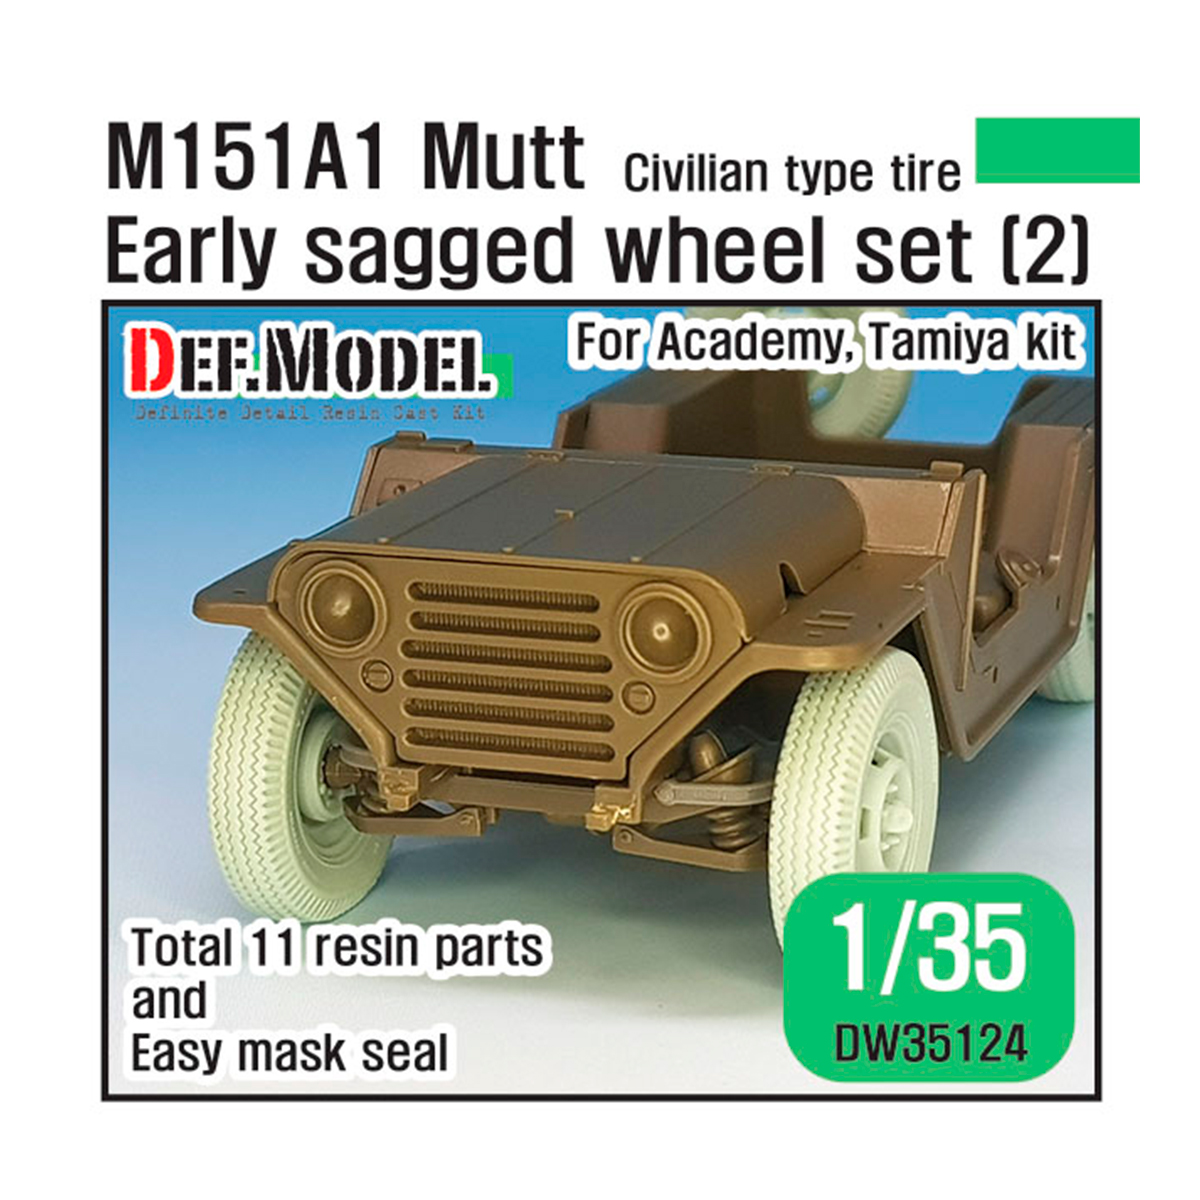 US M151A1 Early sagged wheel set(2)- Civilian tire (for Tamiya/Academy 1/35) (Included front suspension parts)